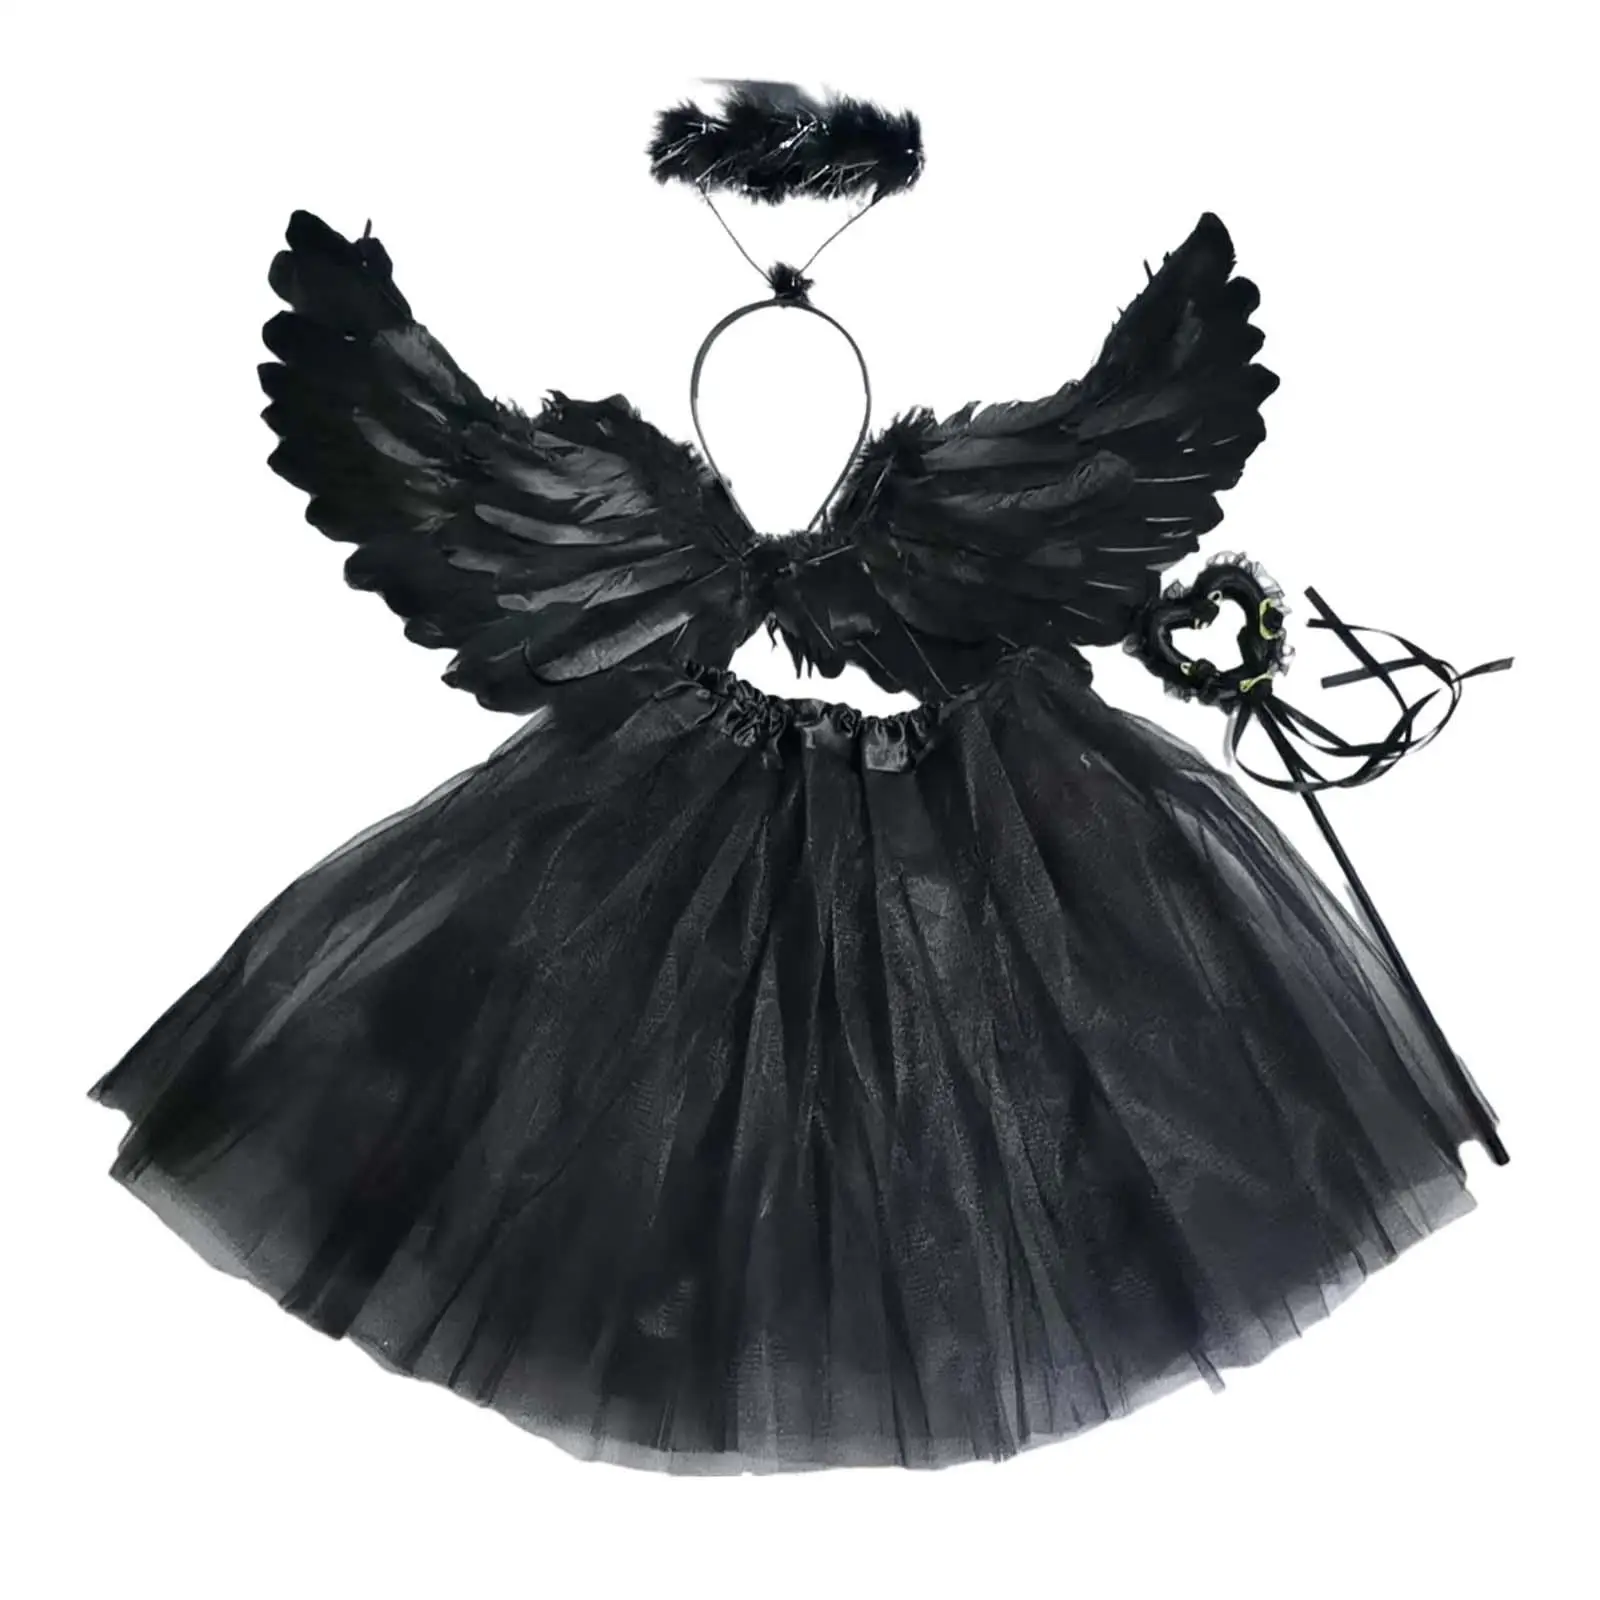 Girls Fairy Costume Angel Wing Costume Children Dress up Kids Cosplay for Festival Photo Props Halloween Party Stage Performance